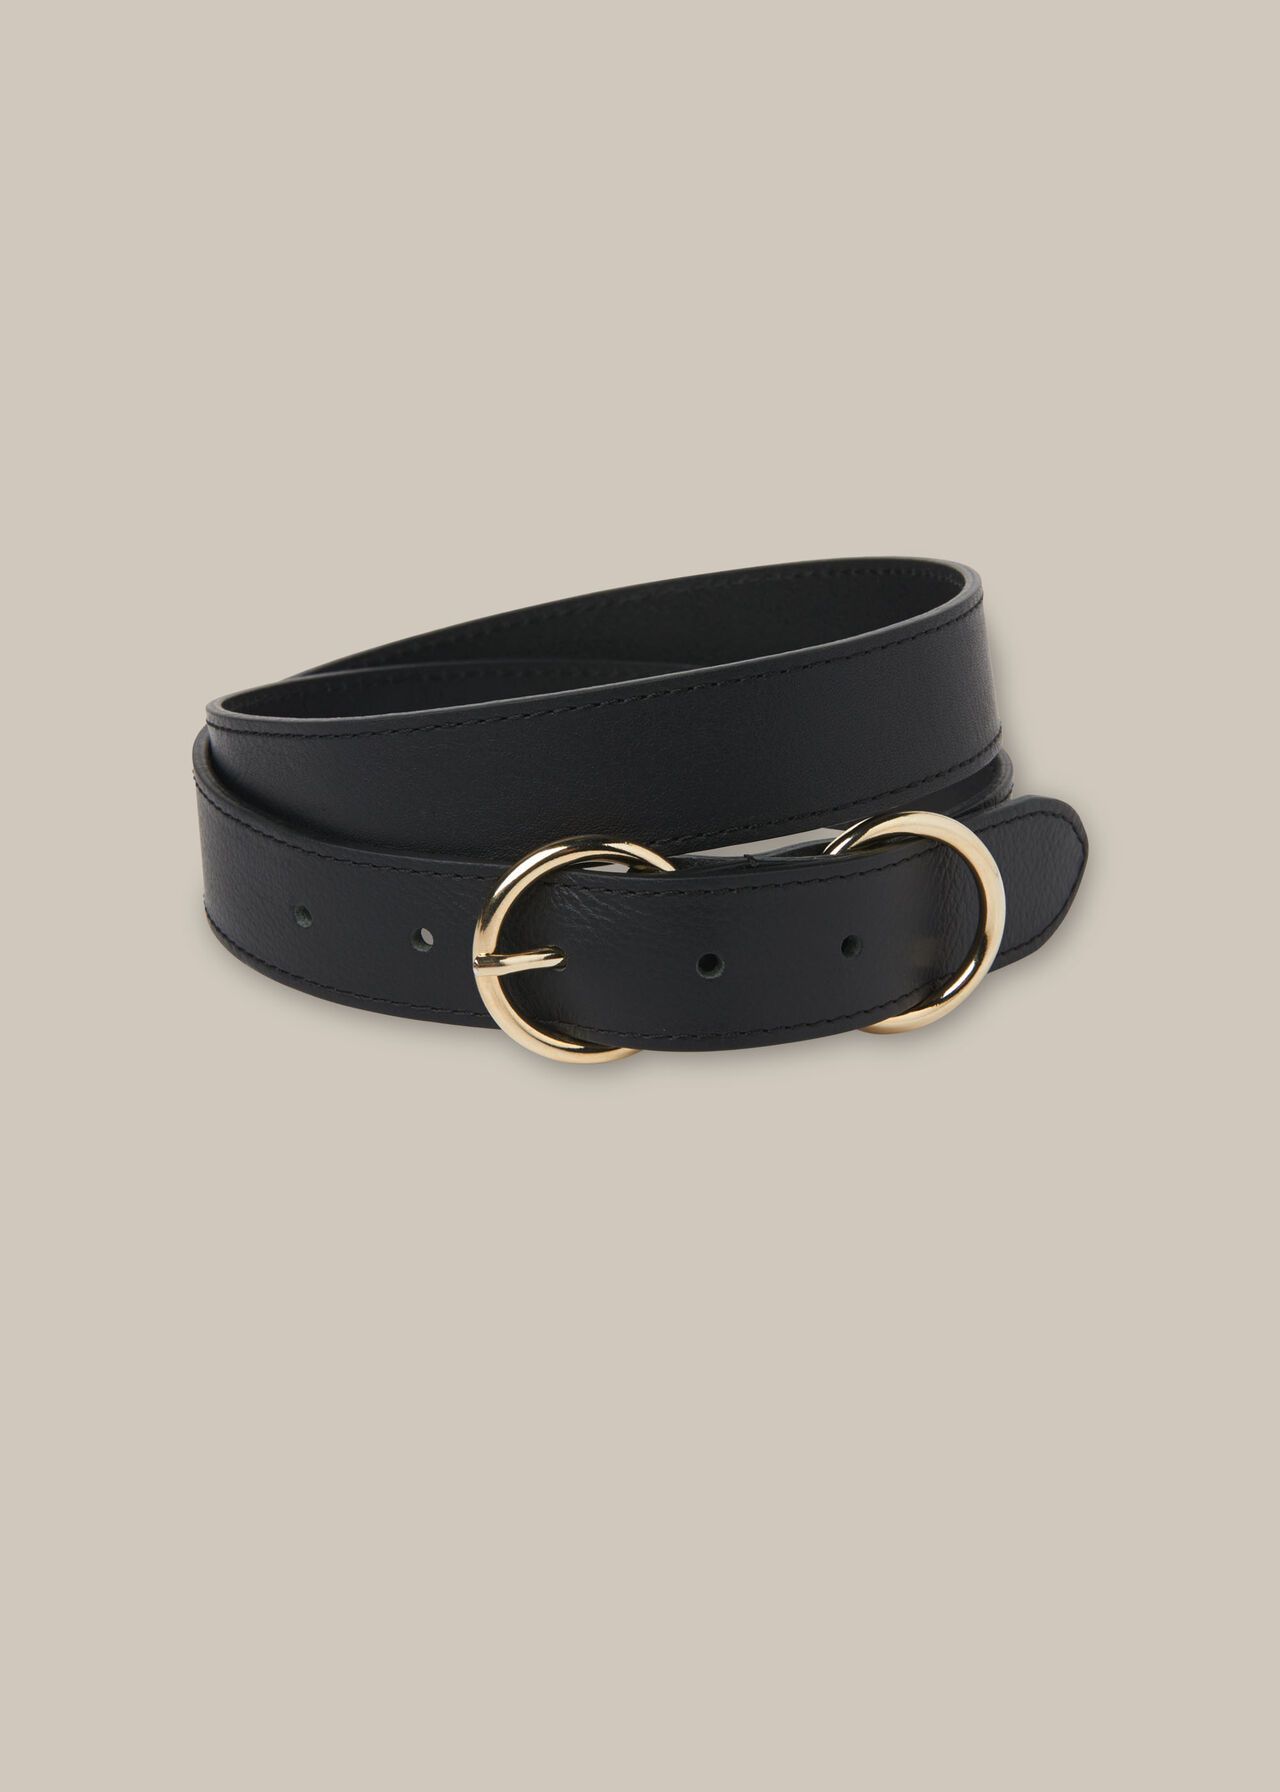 Double Ring Buckle Belt | Whistles